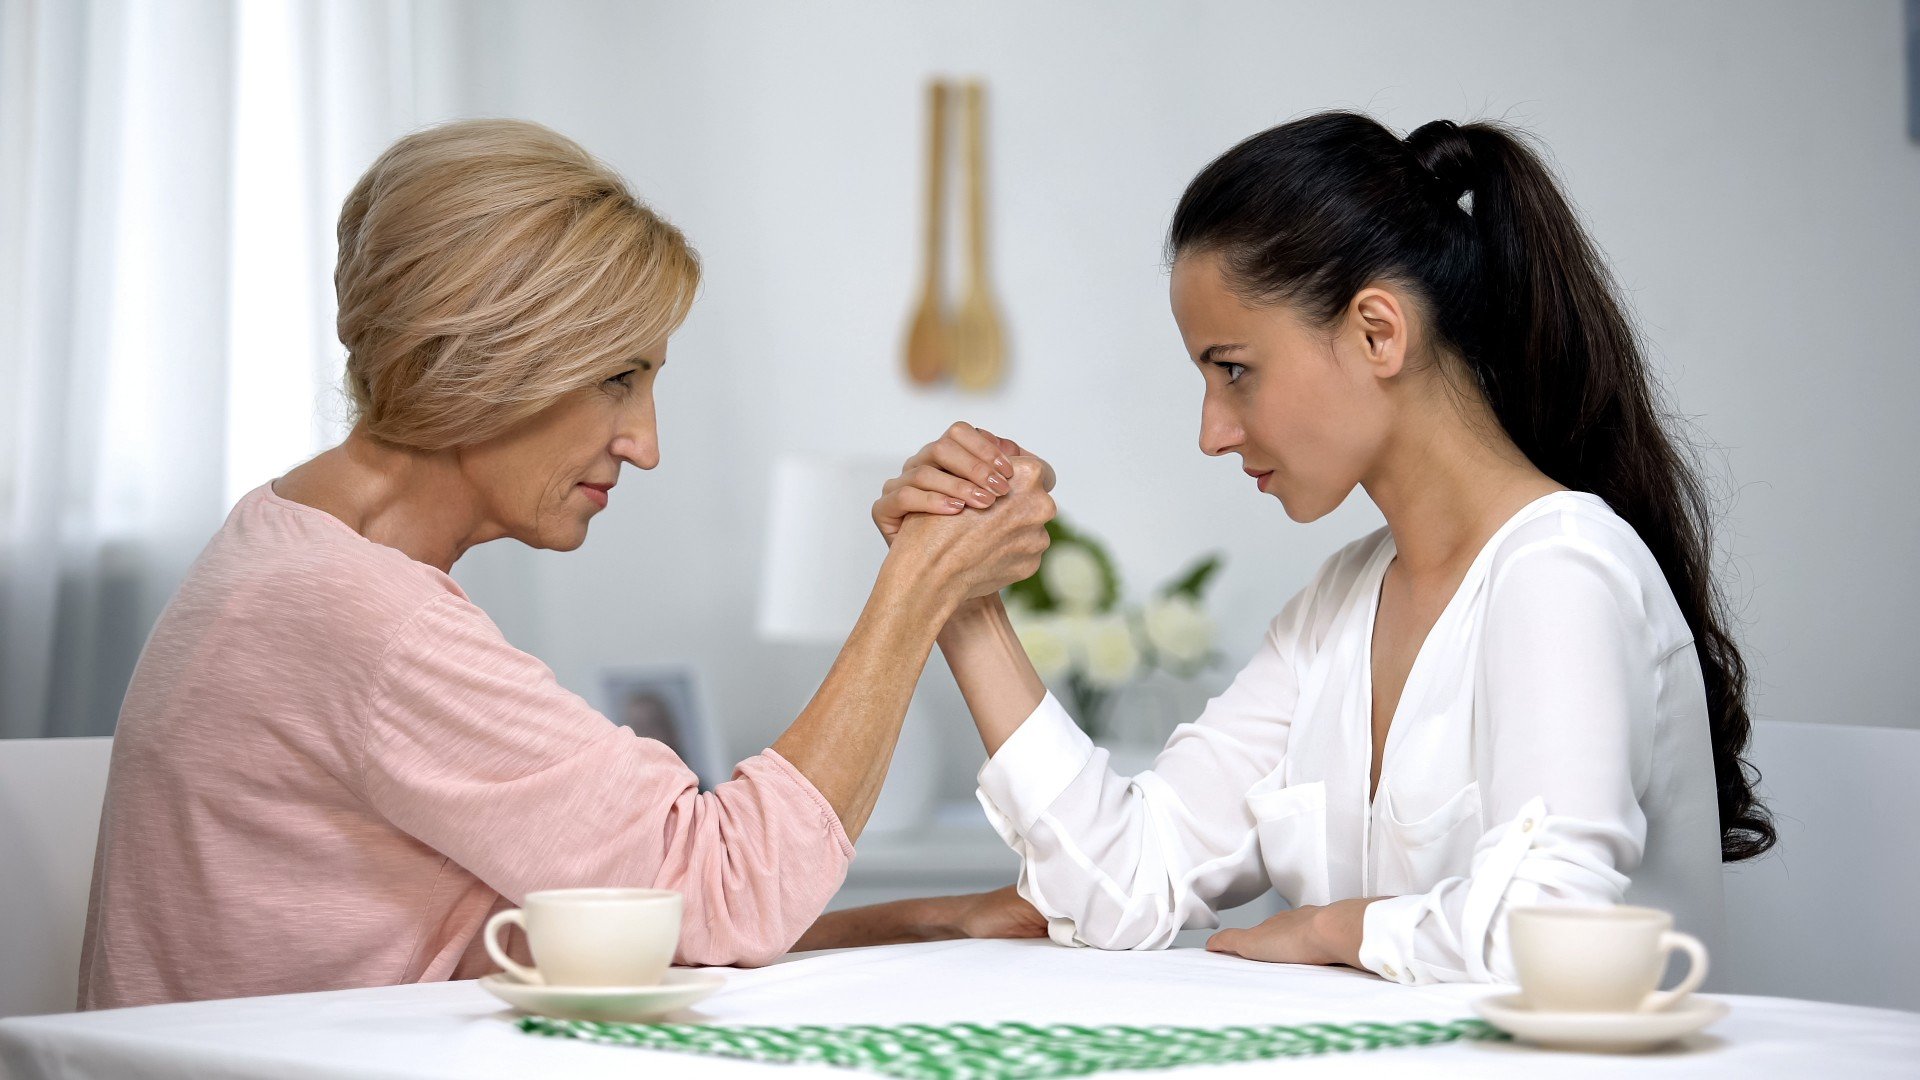 Older woman arm-wrestles a younger woman on wooden table